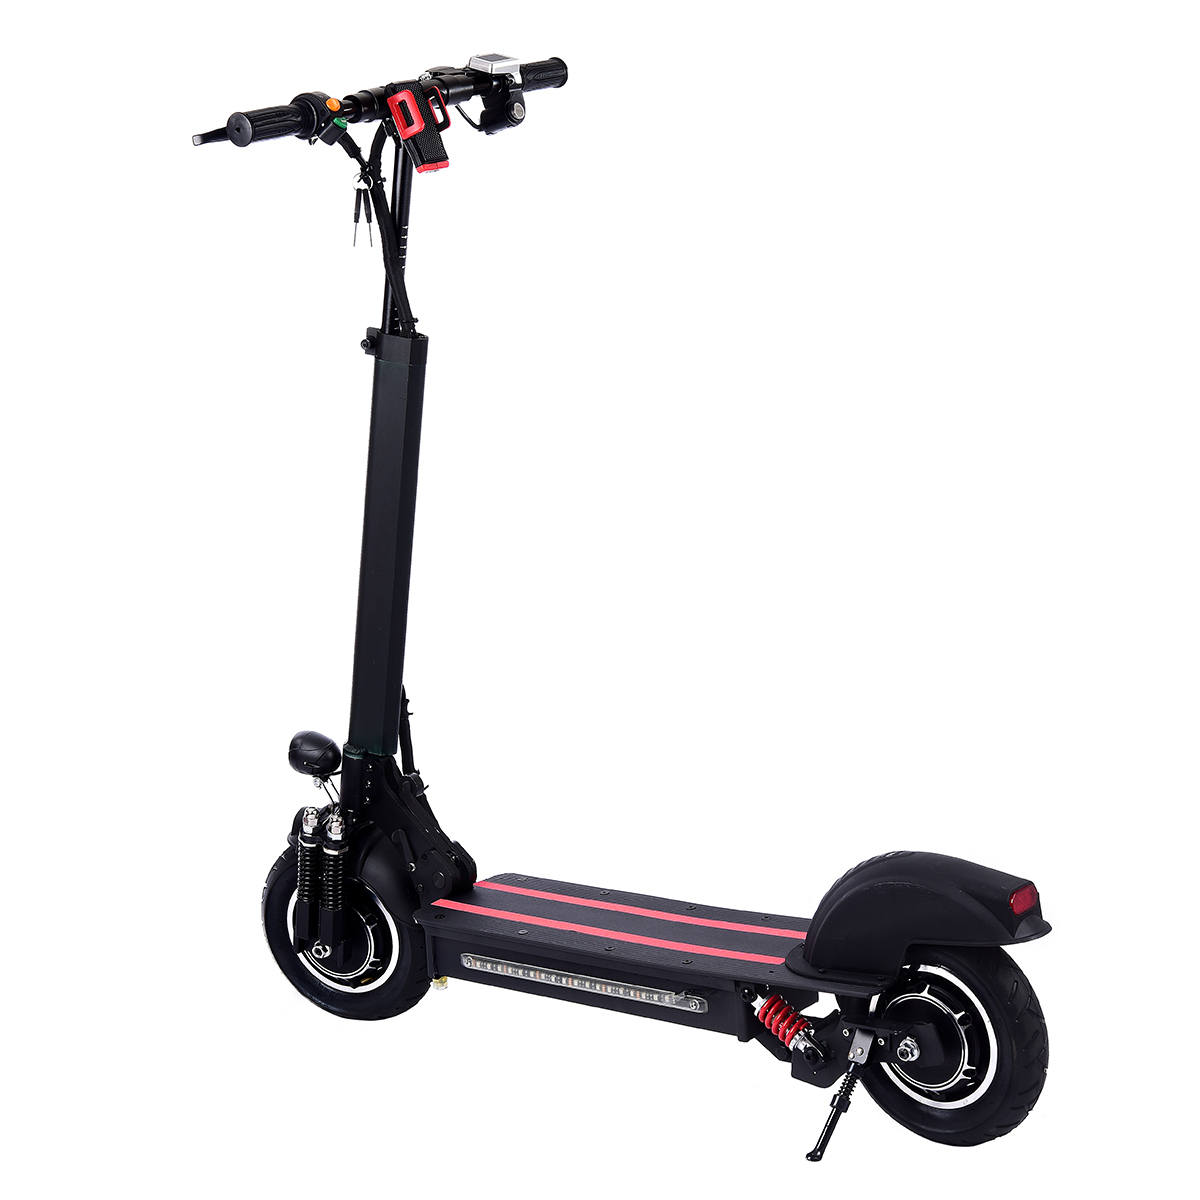 Find EU DIRECT Lamtwheel 48V 22Ah 600W 2 Dual Motor 10 inch Tire Electric Scooter 45km Mileage Range 120kg Max Load E Scooter for Sale on Gipsybee.com with cryptocurrencies